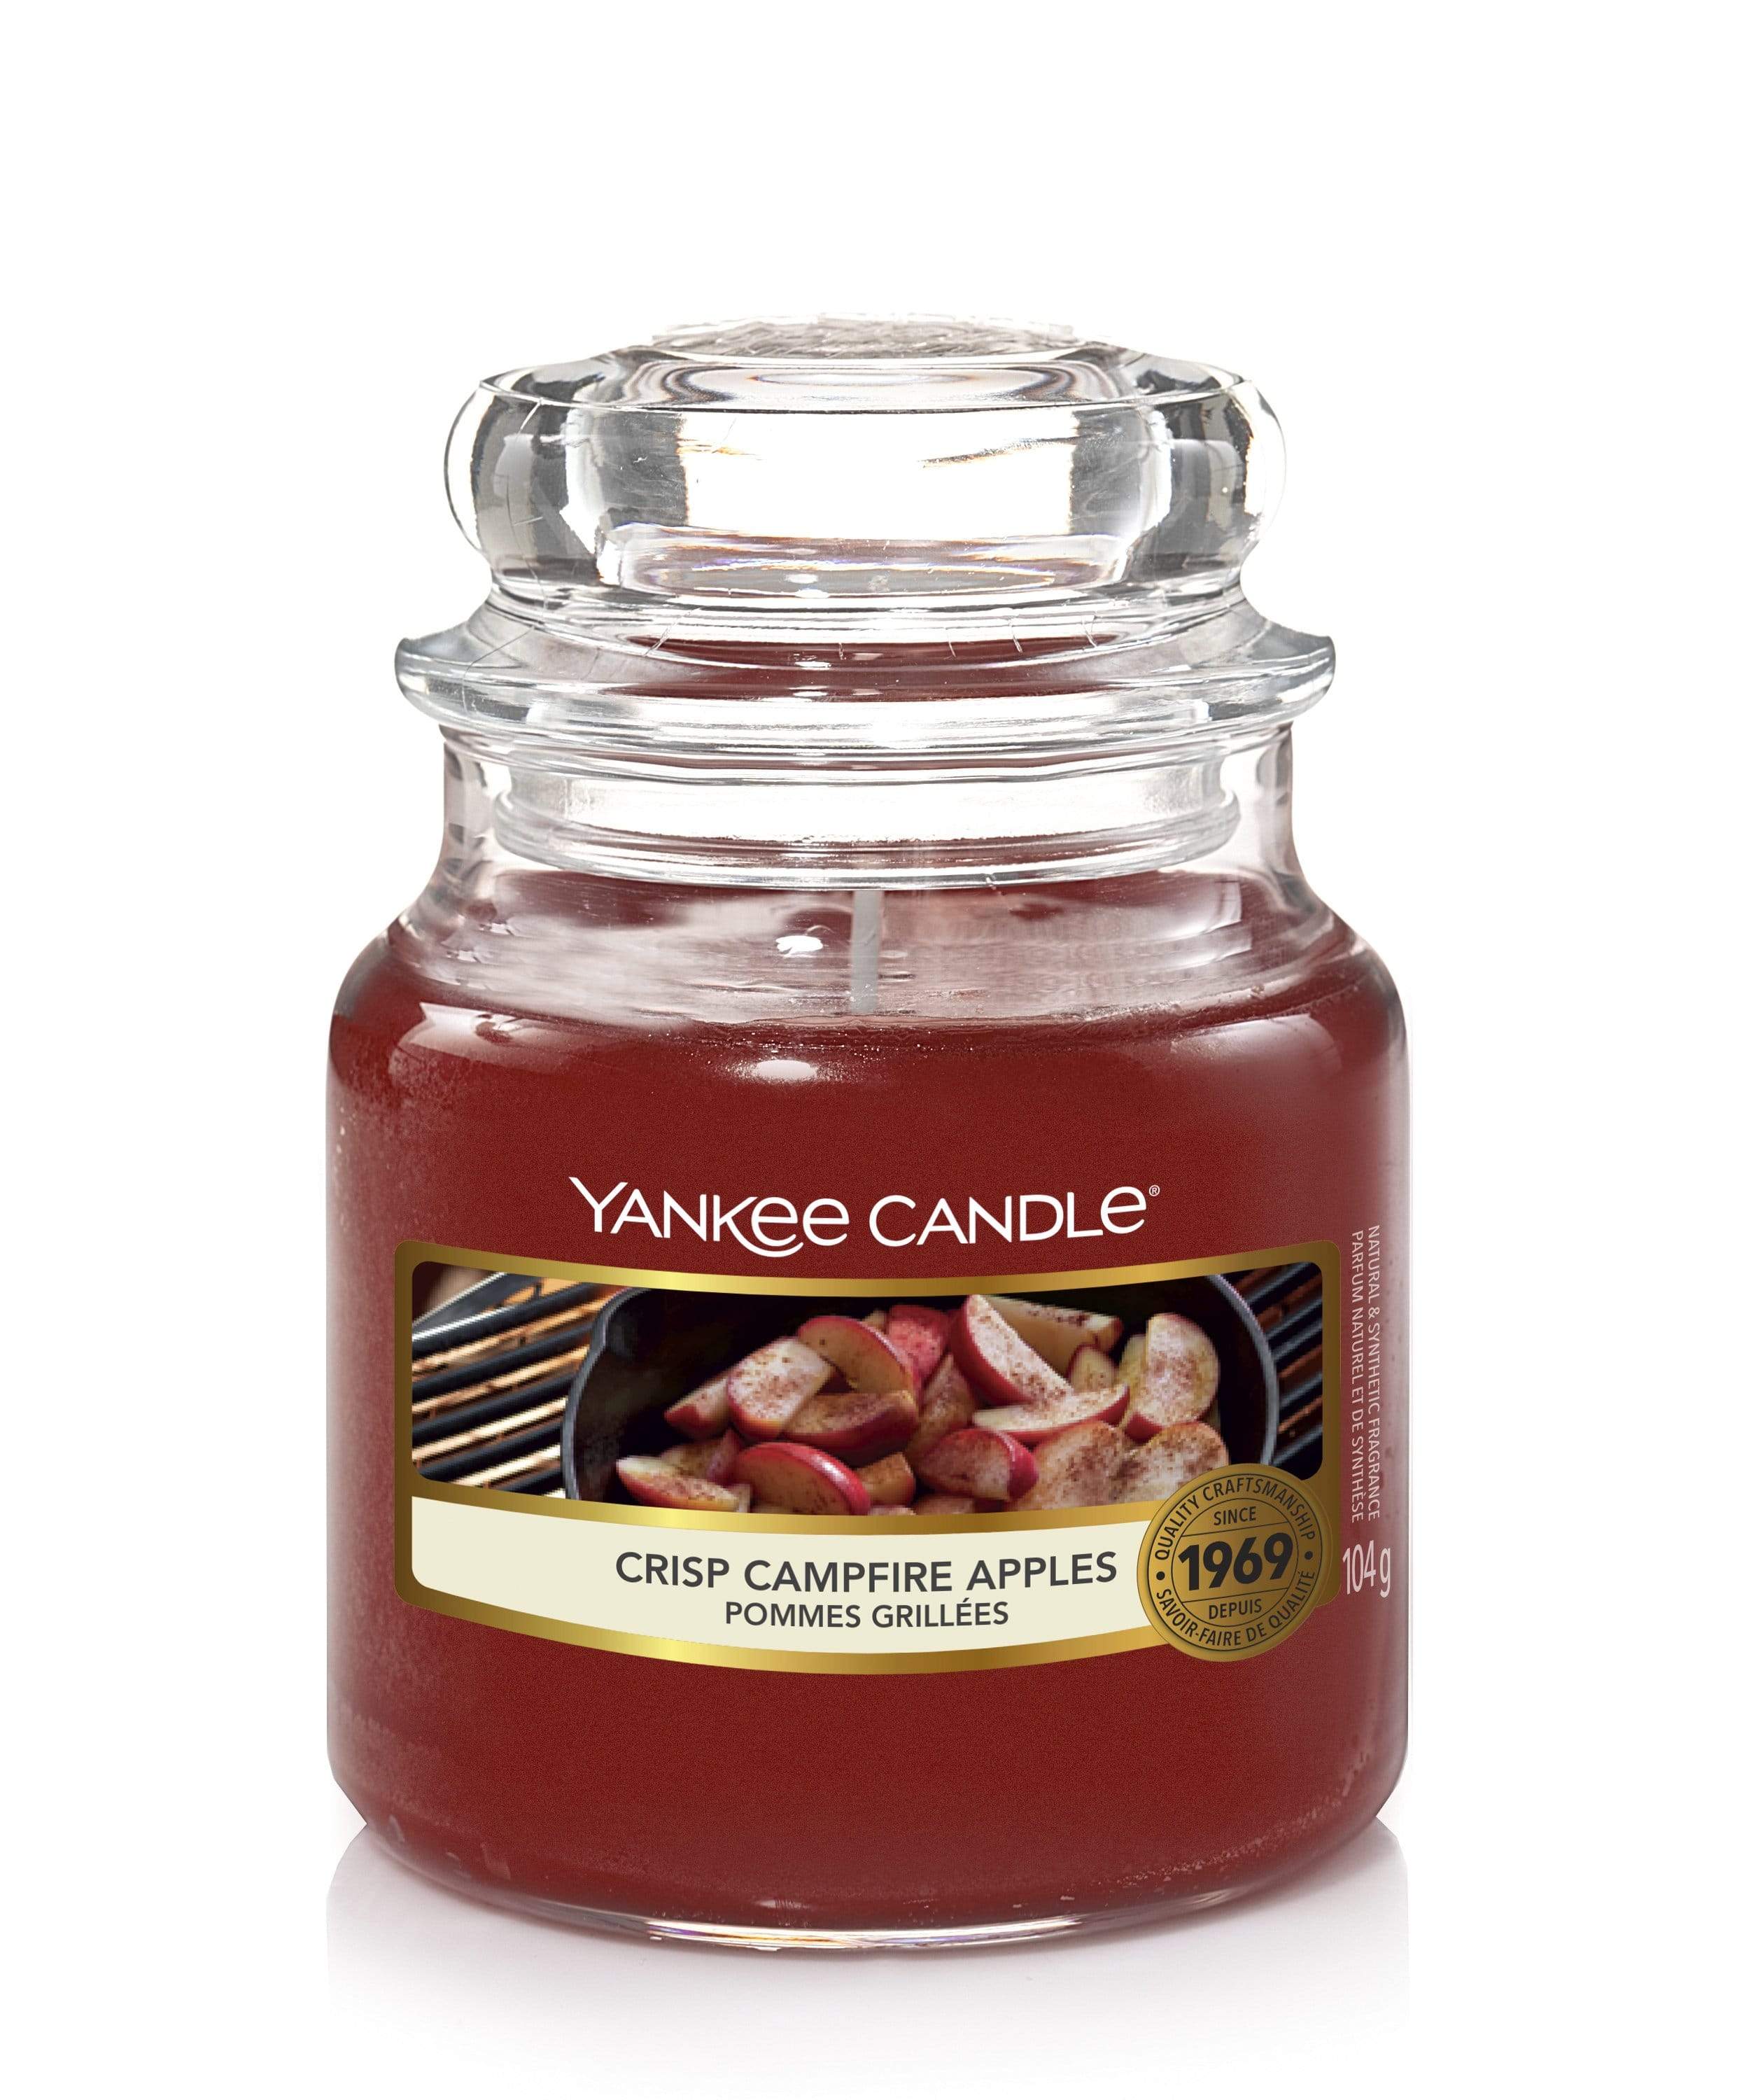 Yankee Candle Small Jar Candle Yankee Candle Small Jar - Crisp Campfire Apples